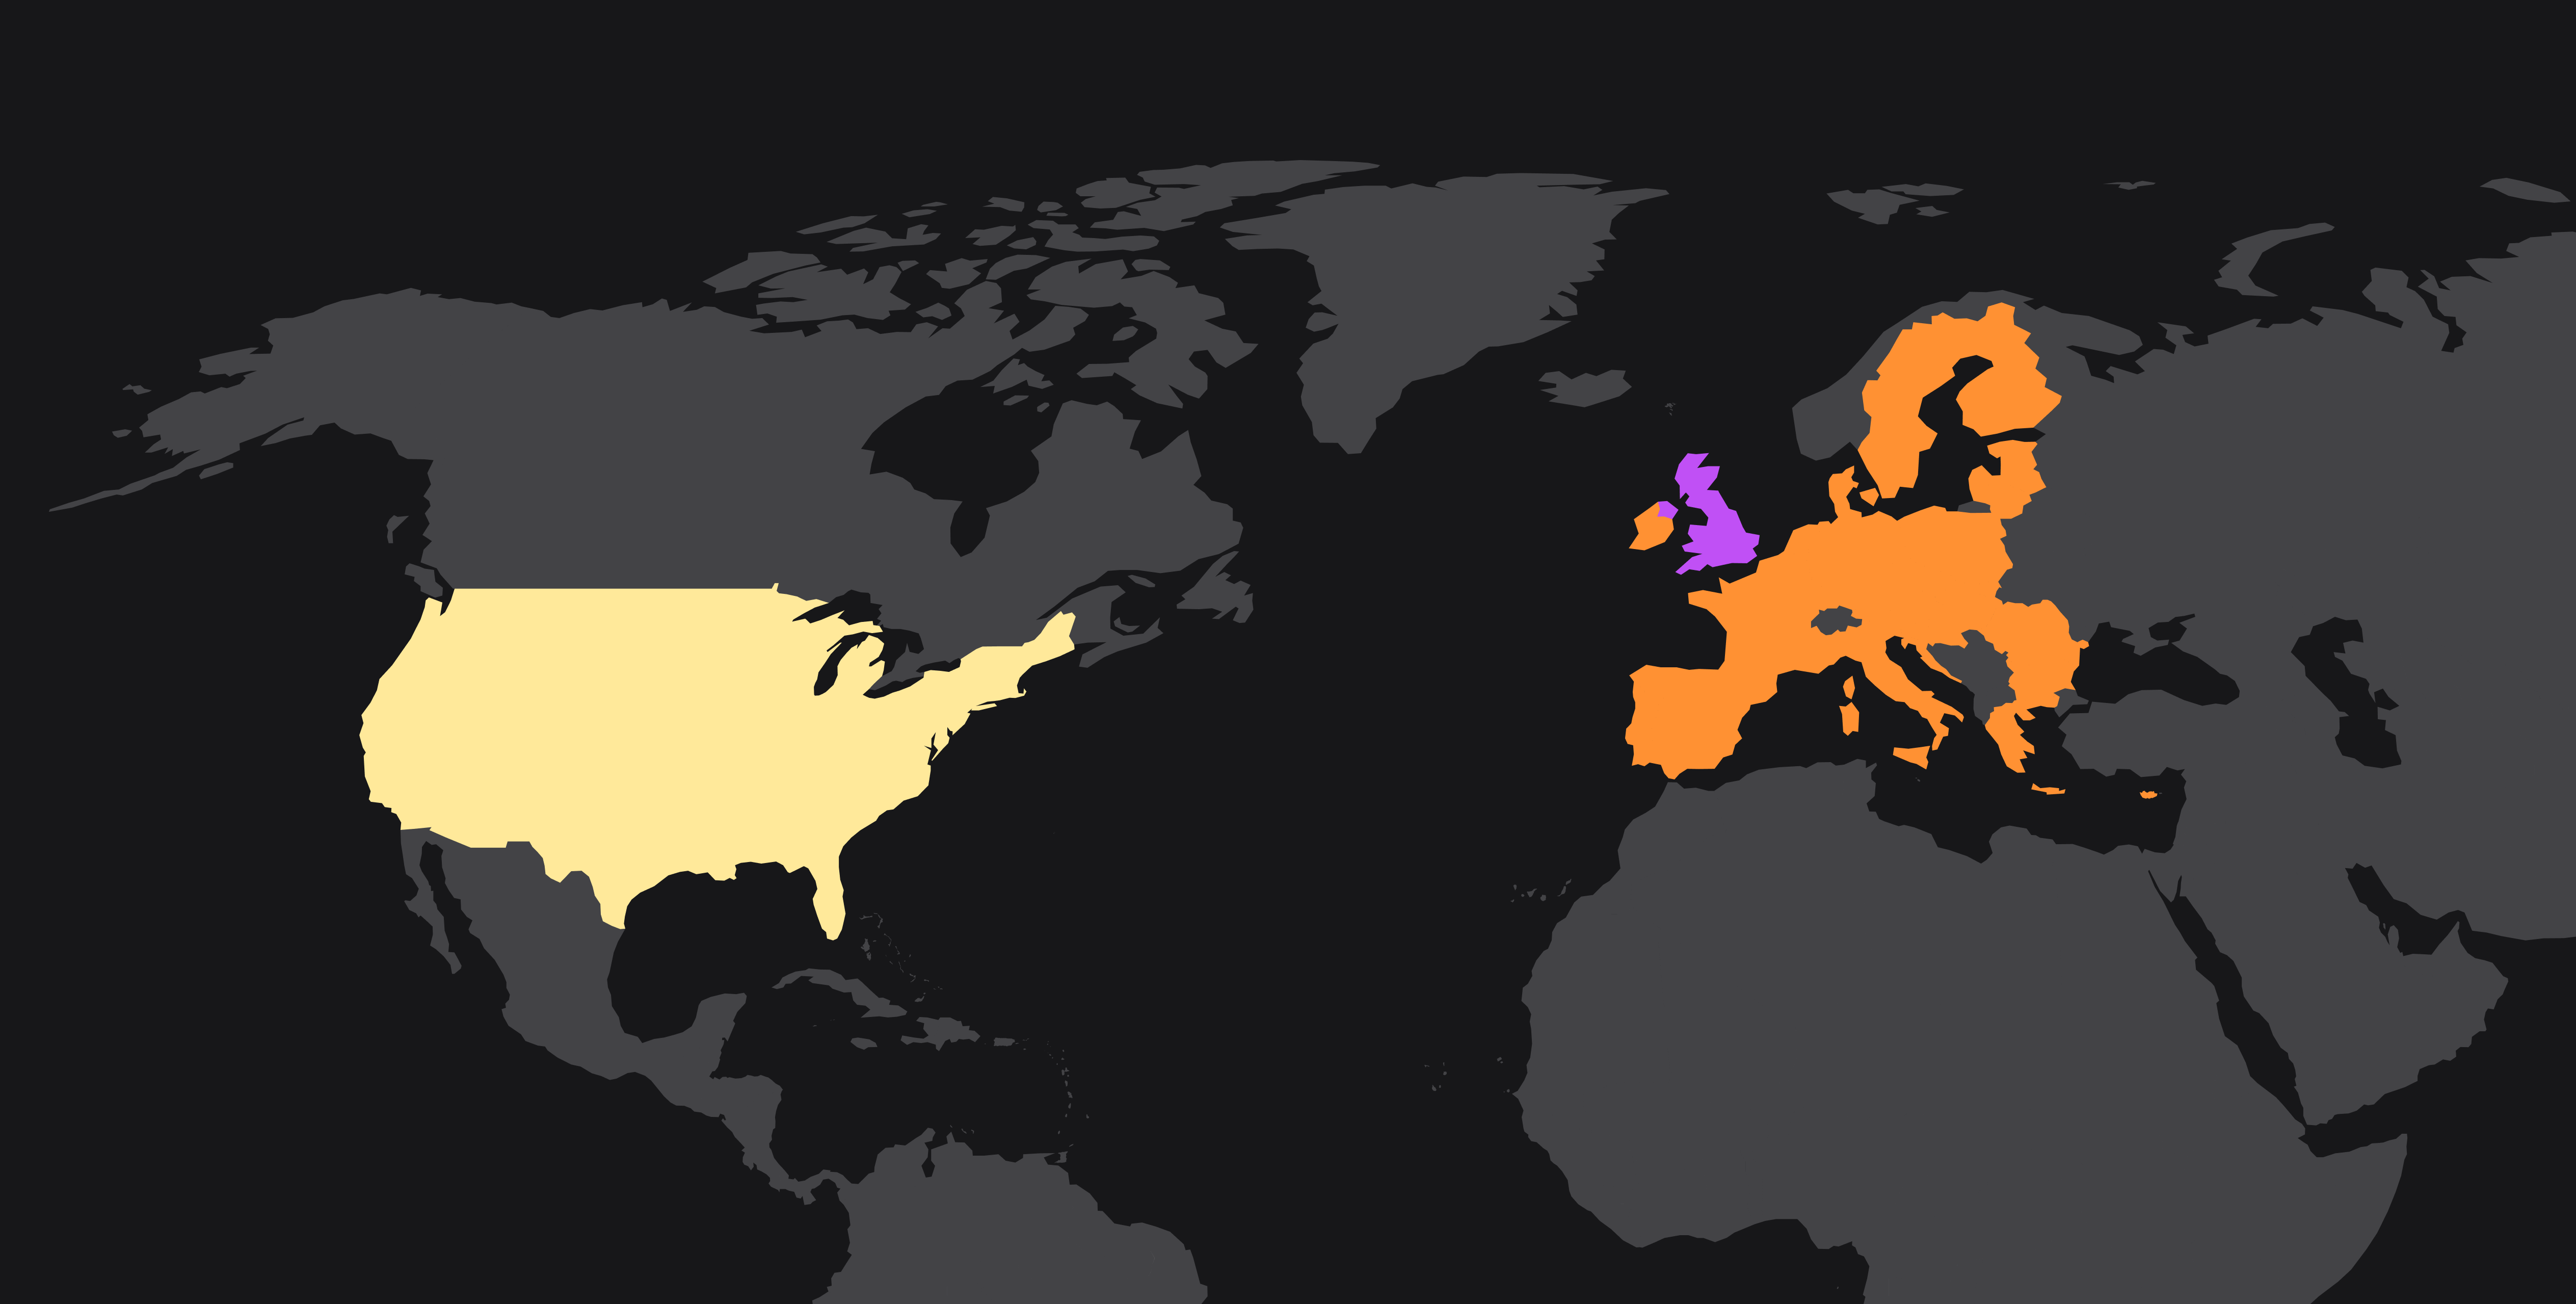 Map depicts three different locales available for data collection, processing, and storage through Dandi Self-ID: US, UK, and EU.